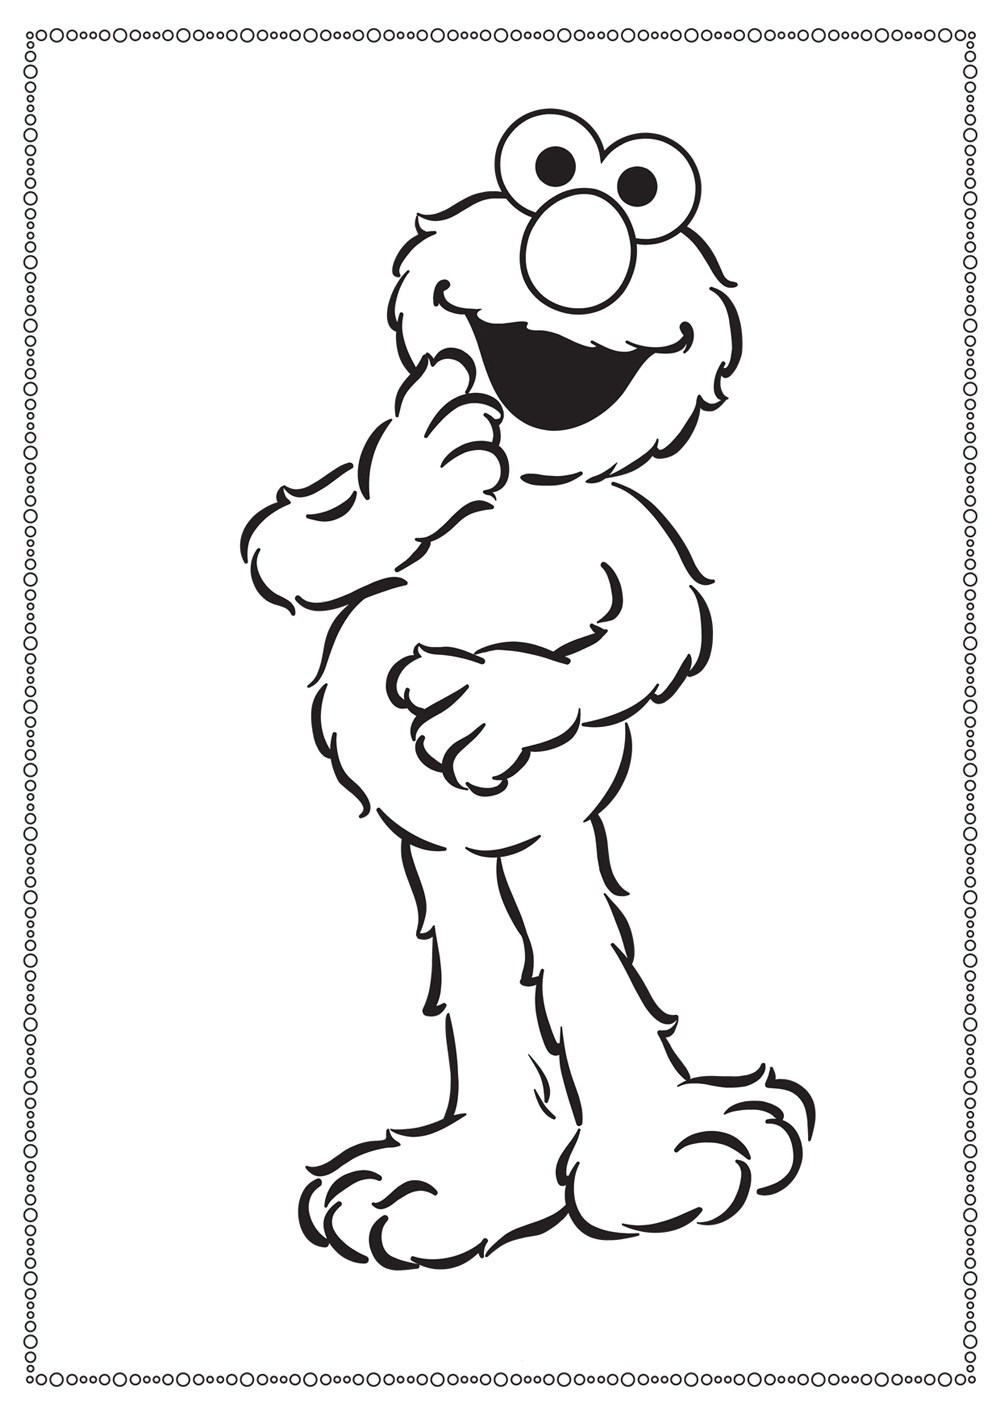 Sesame Street Coloring Pages - Sesame Street Coloring Pages For Kids - Free Printable Coloring Pages Sesame Street Characters